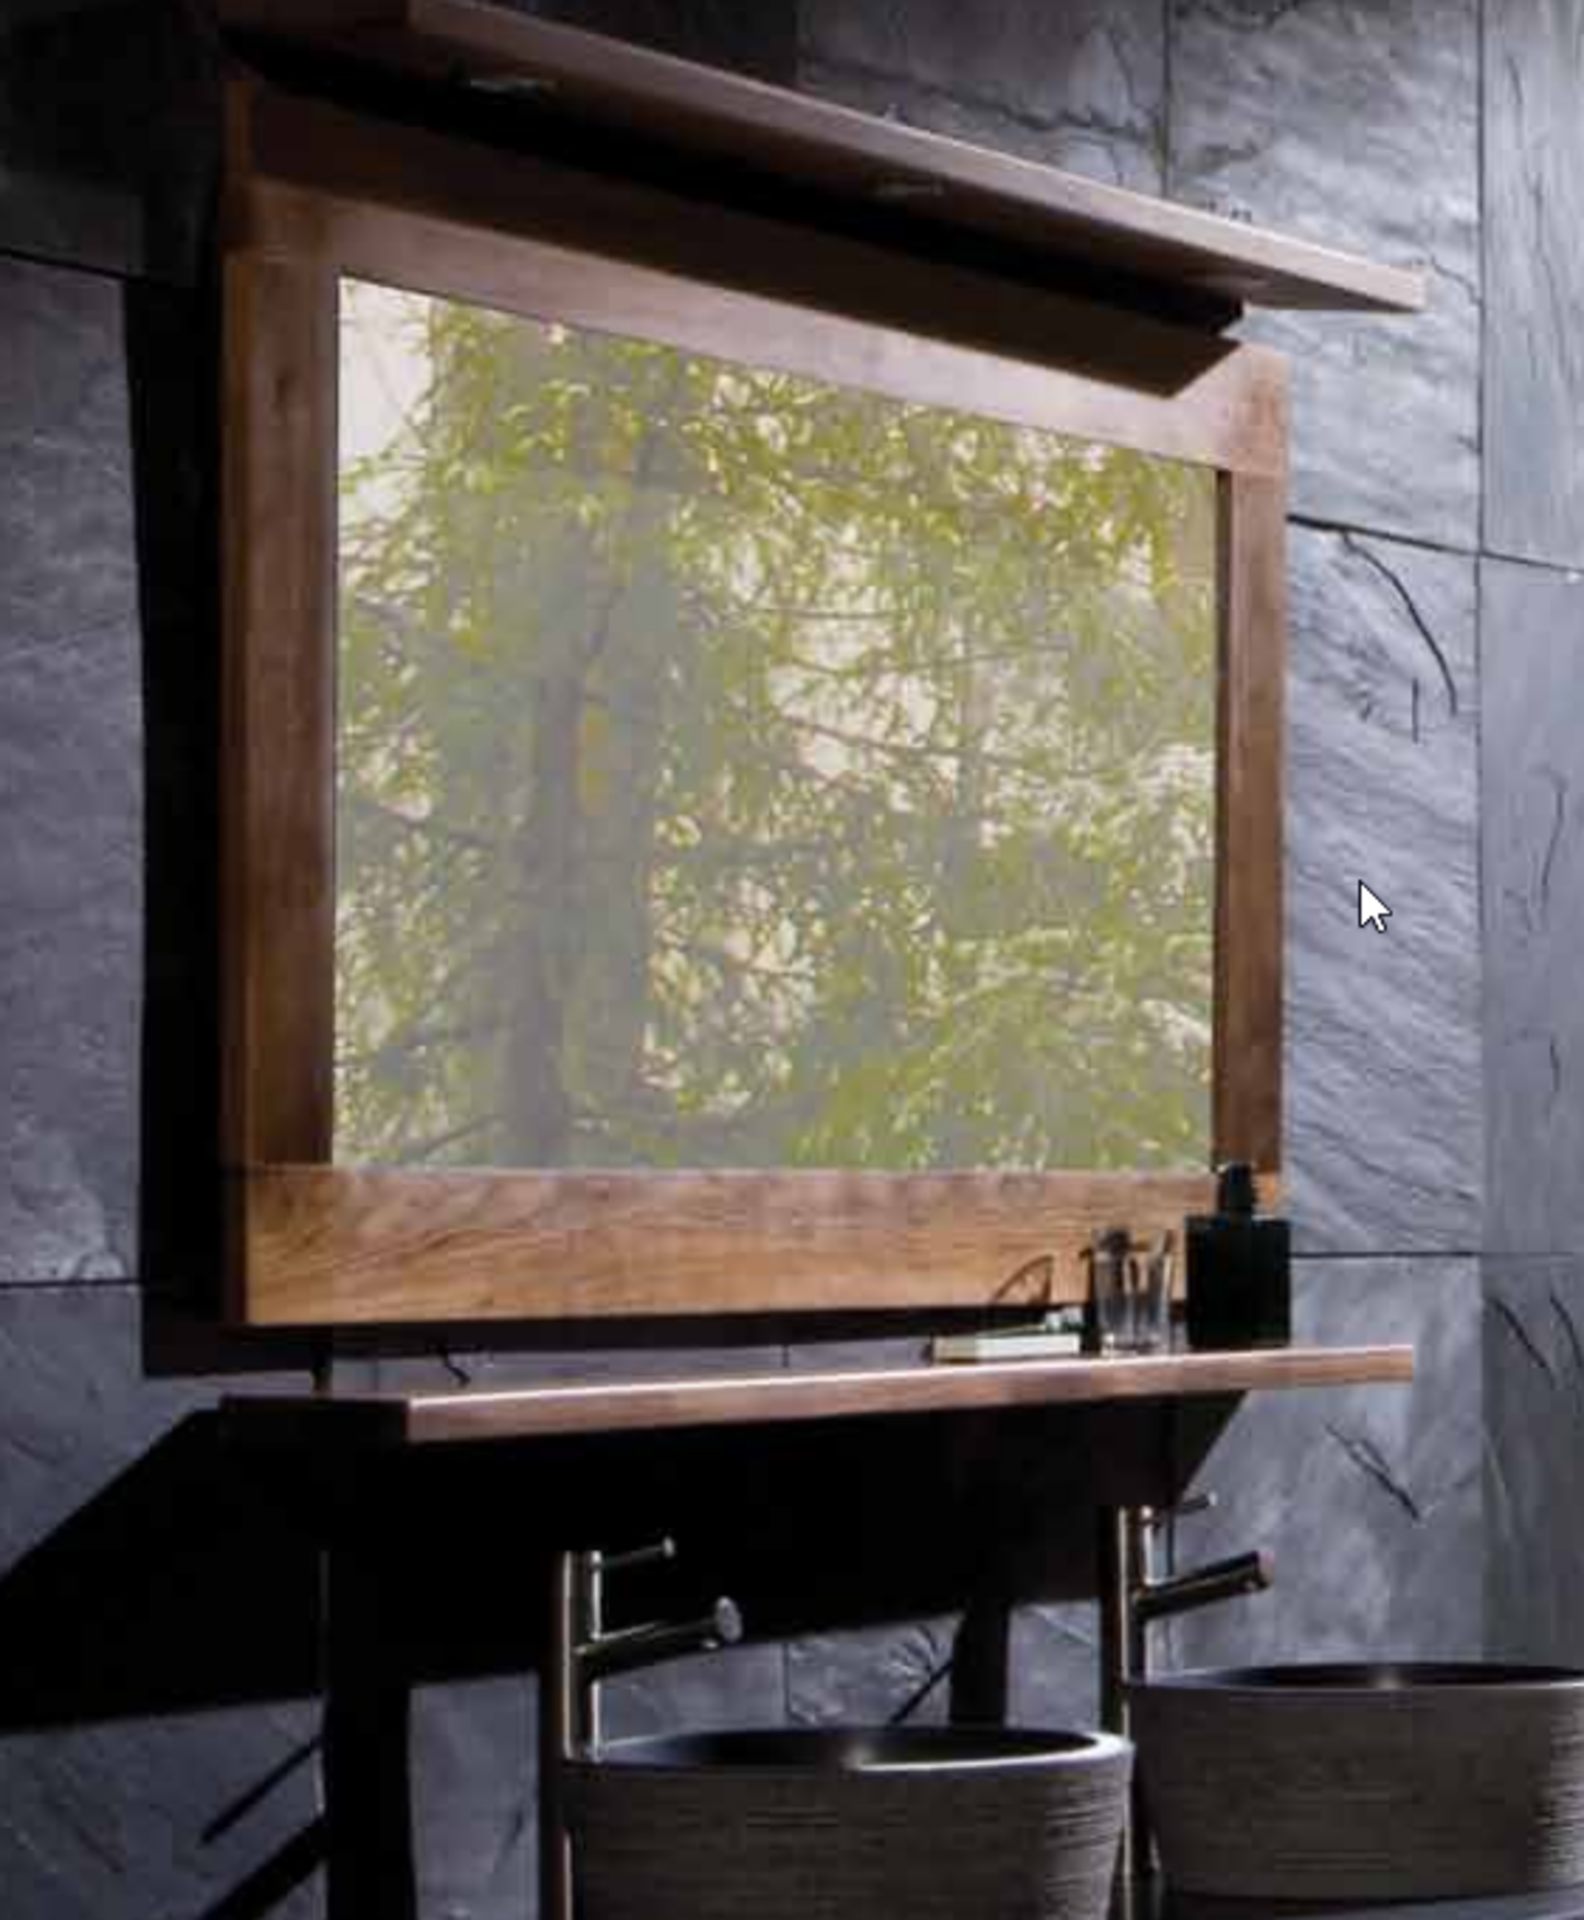 1 x Stonearth Bathroom Wall Mirror - American Solid Walnut Frame With Bevelled Glass - Size: Medium - Image 5 of 9